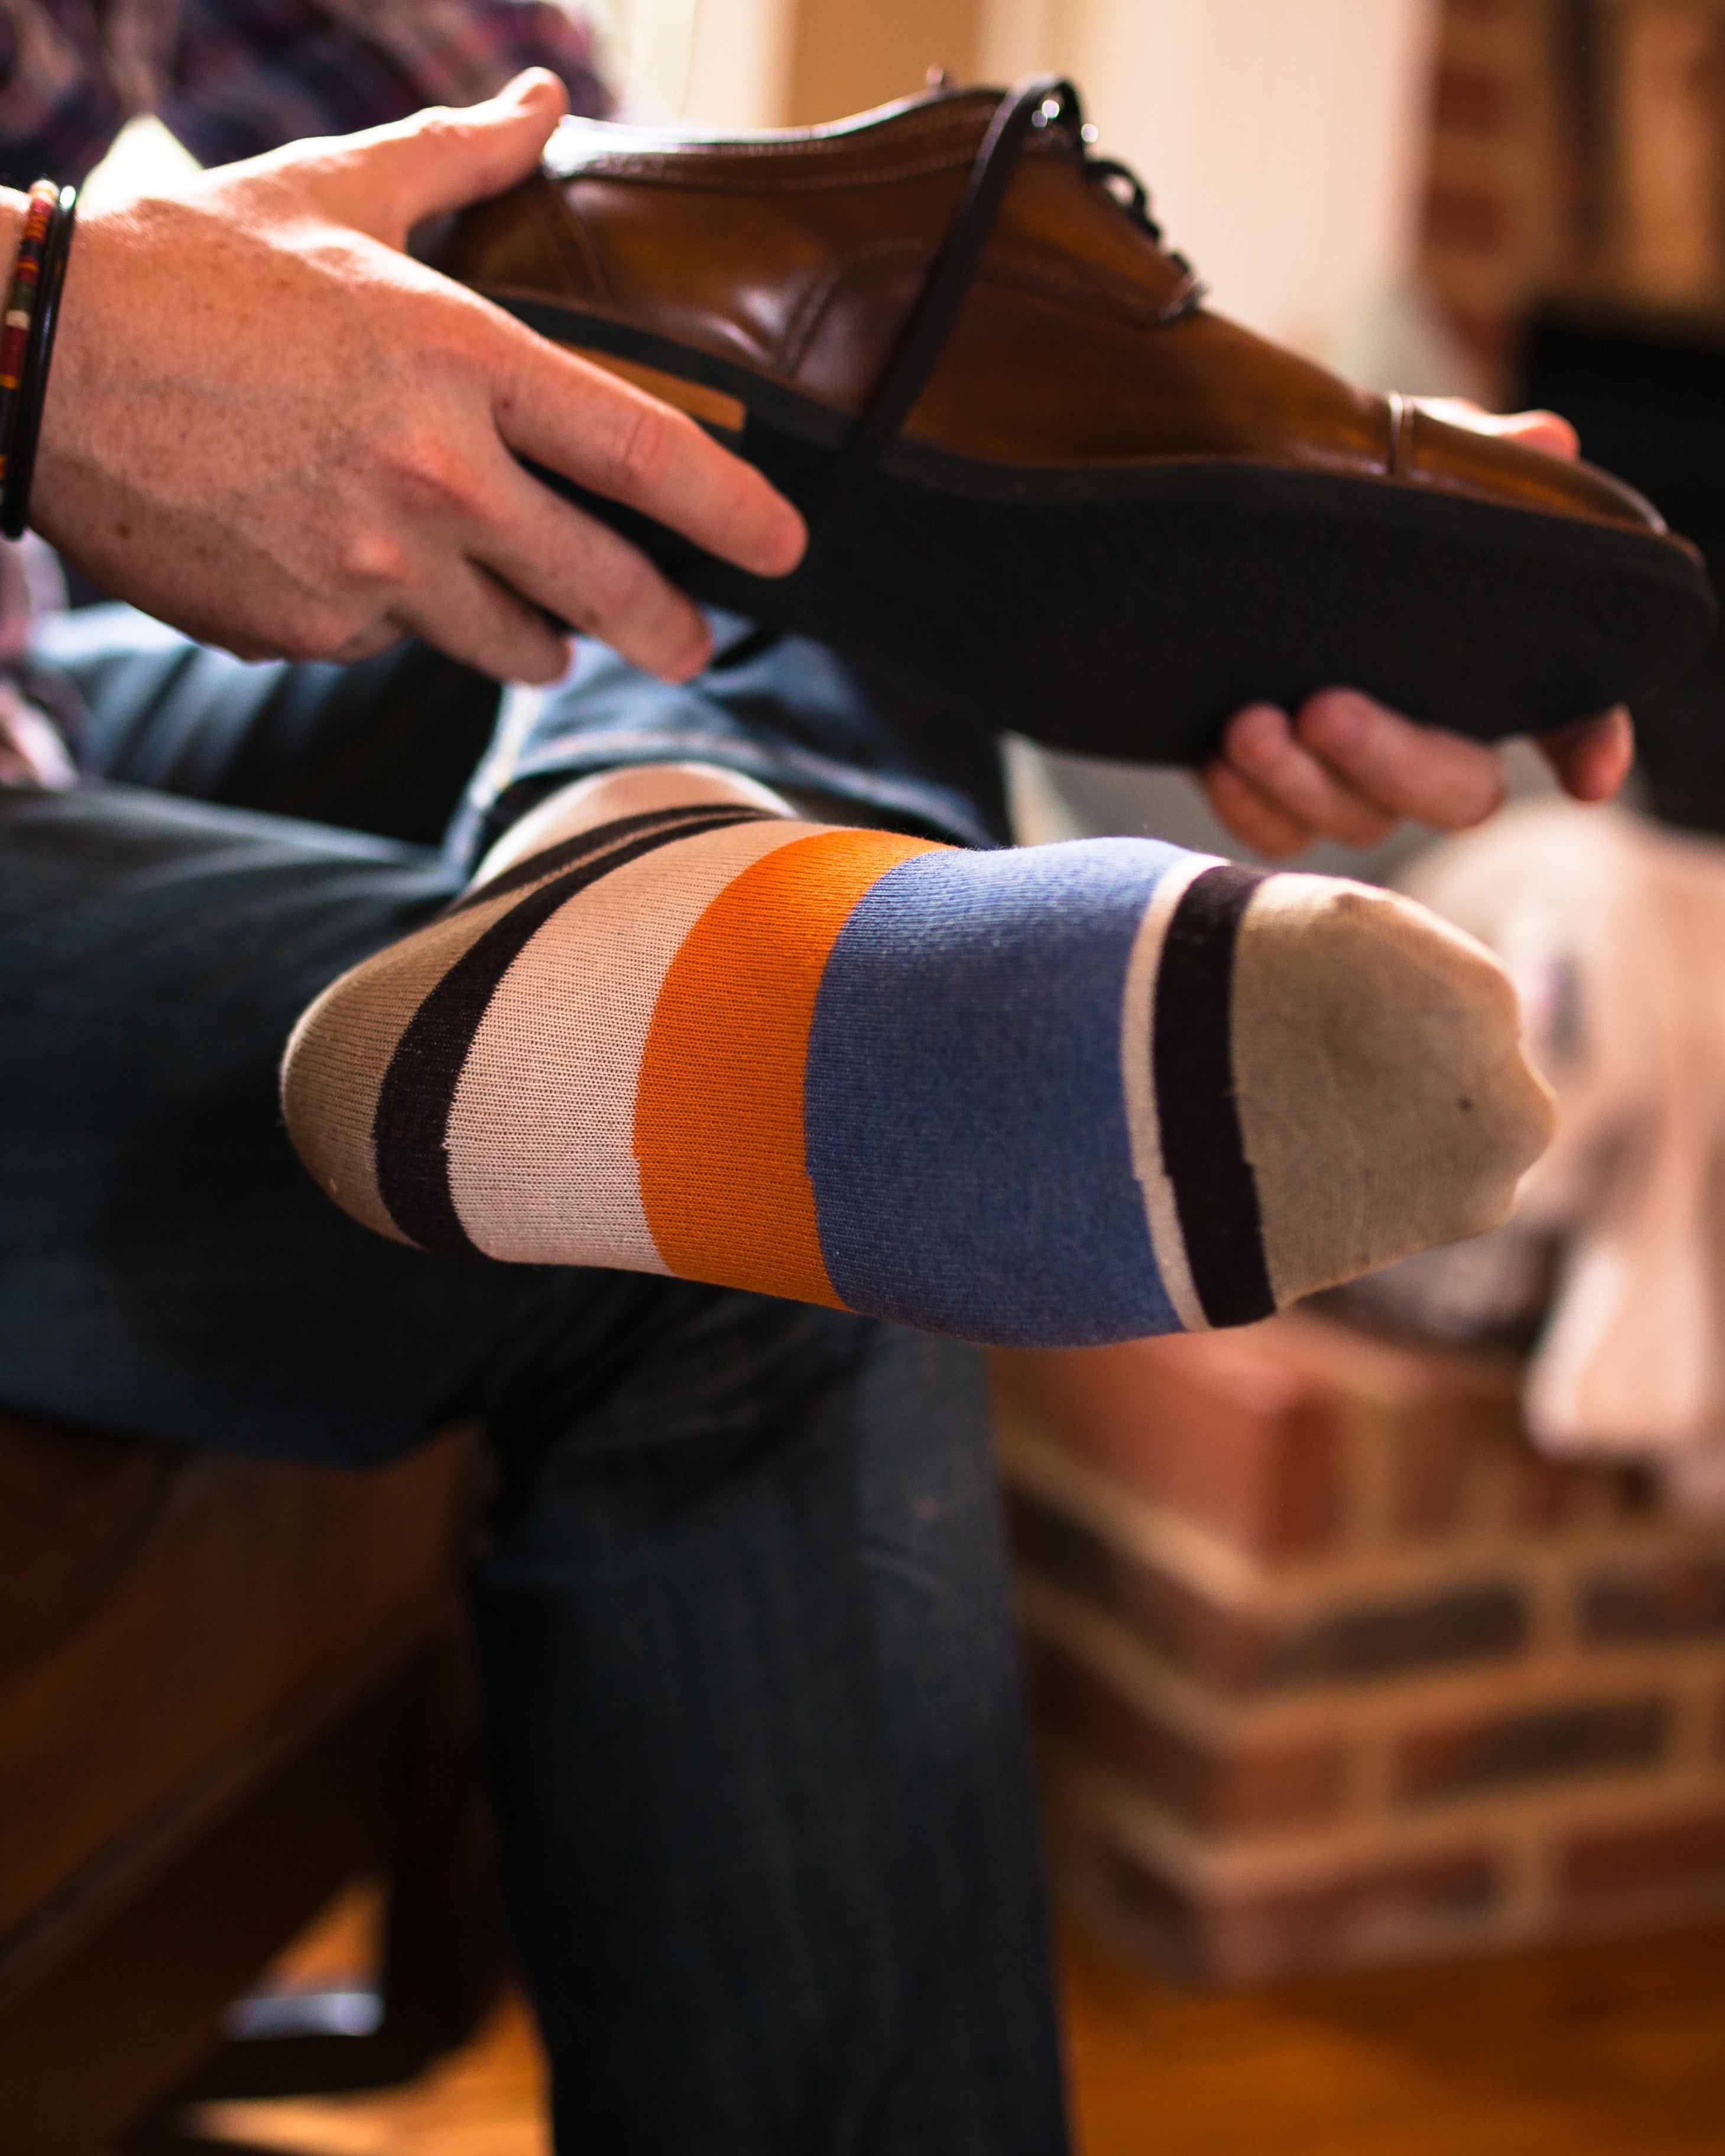 beige over the calf dress socks with orange and light blue stripes, holding brown dress shoes